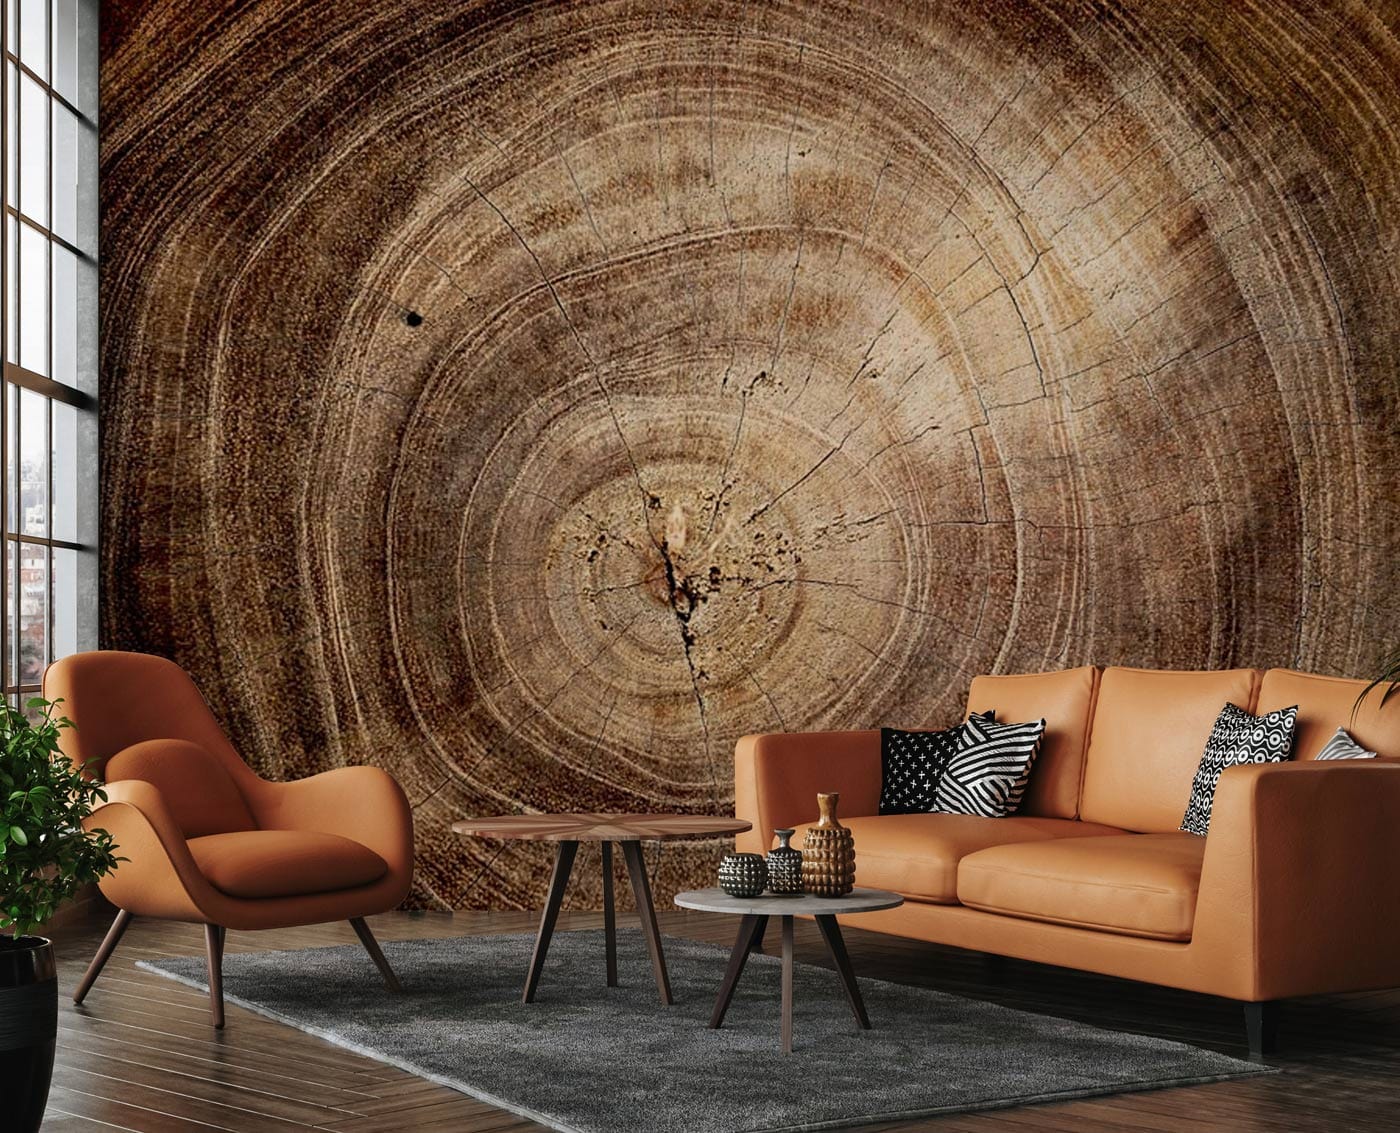 Wallpaper Mural with Cracked Wood Effect for Use in Decorating the Living Room